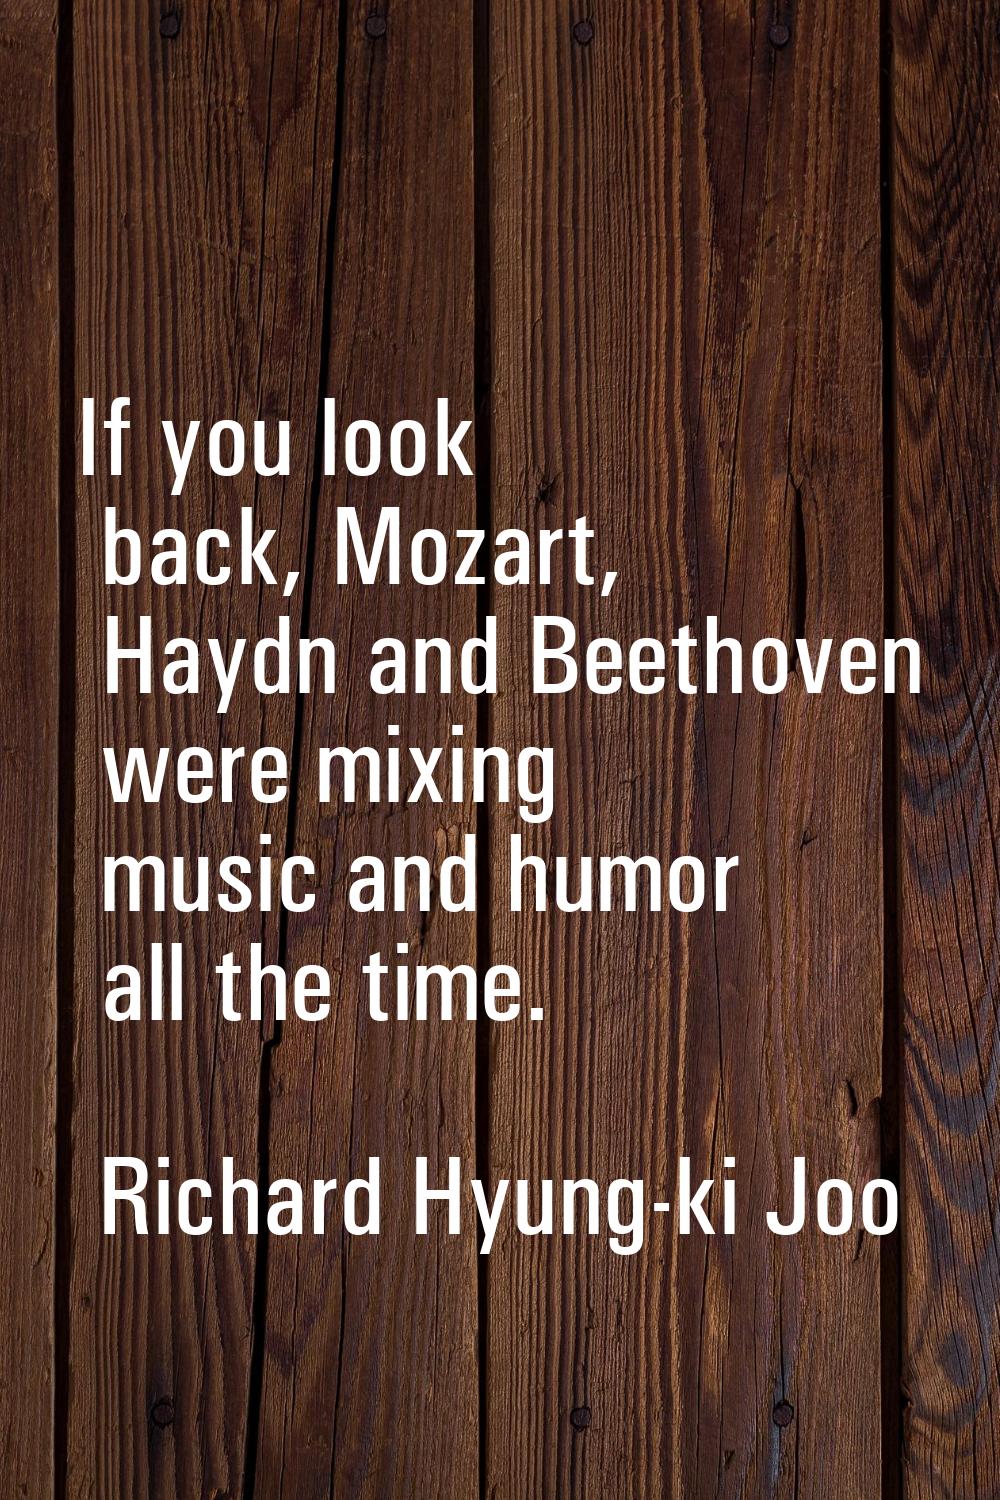 If you look back, Mozart, Haydn and Beethoven were mixing music and humor all the time.